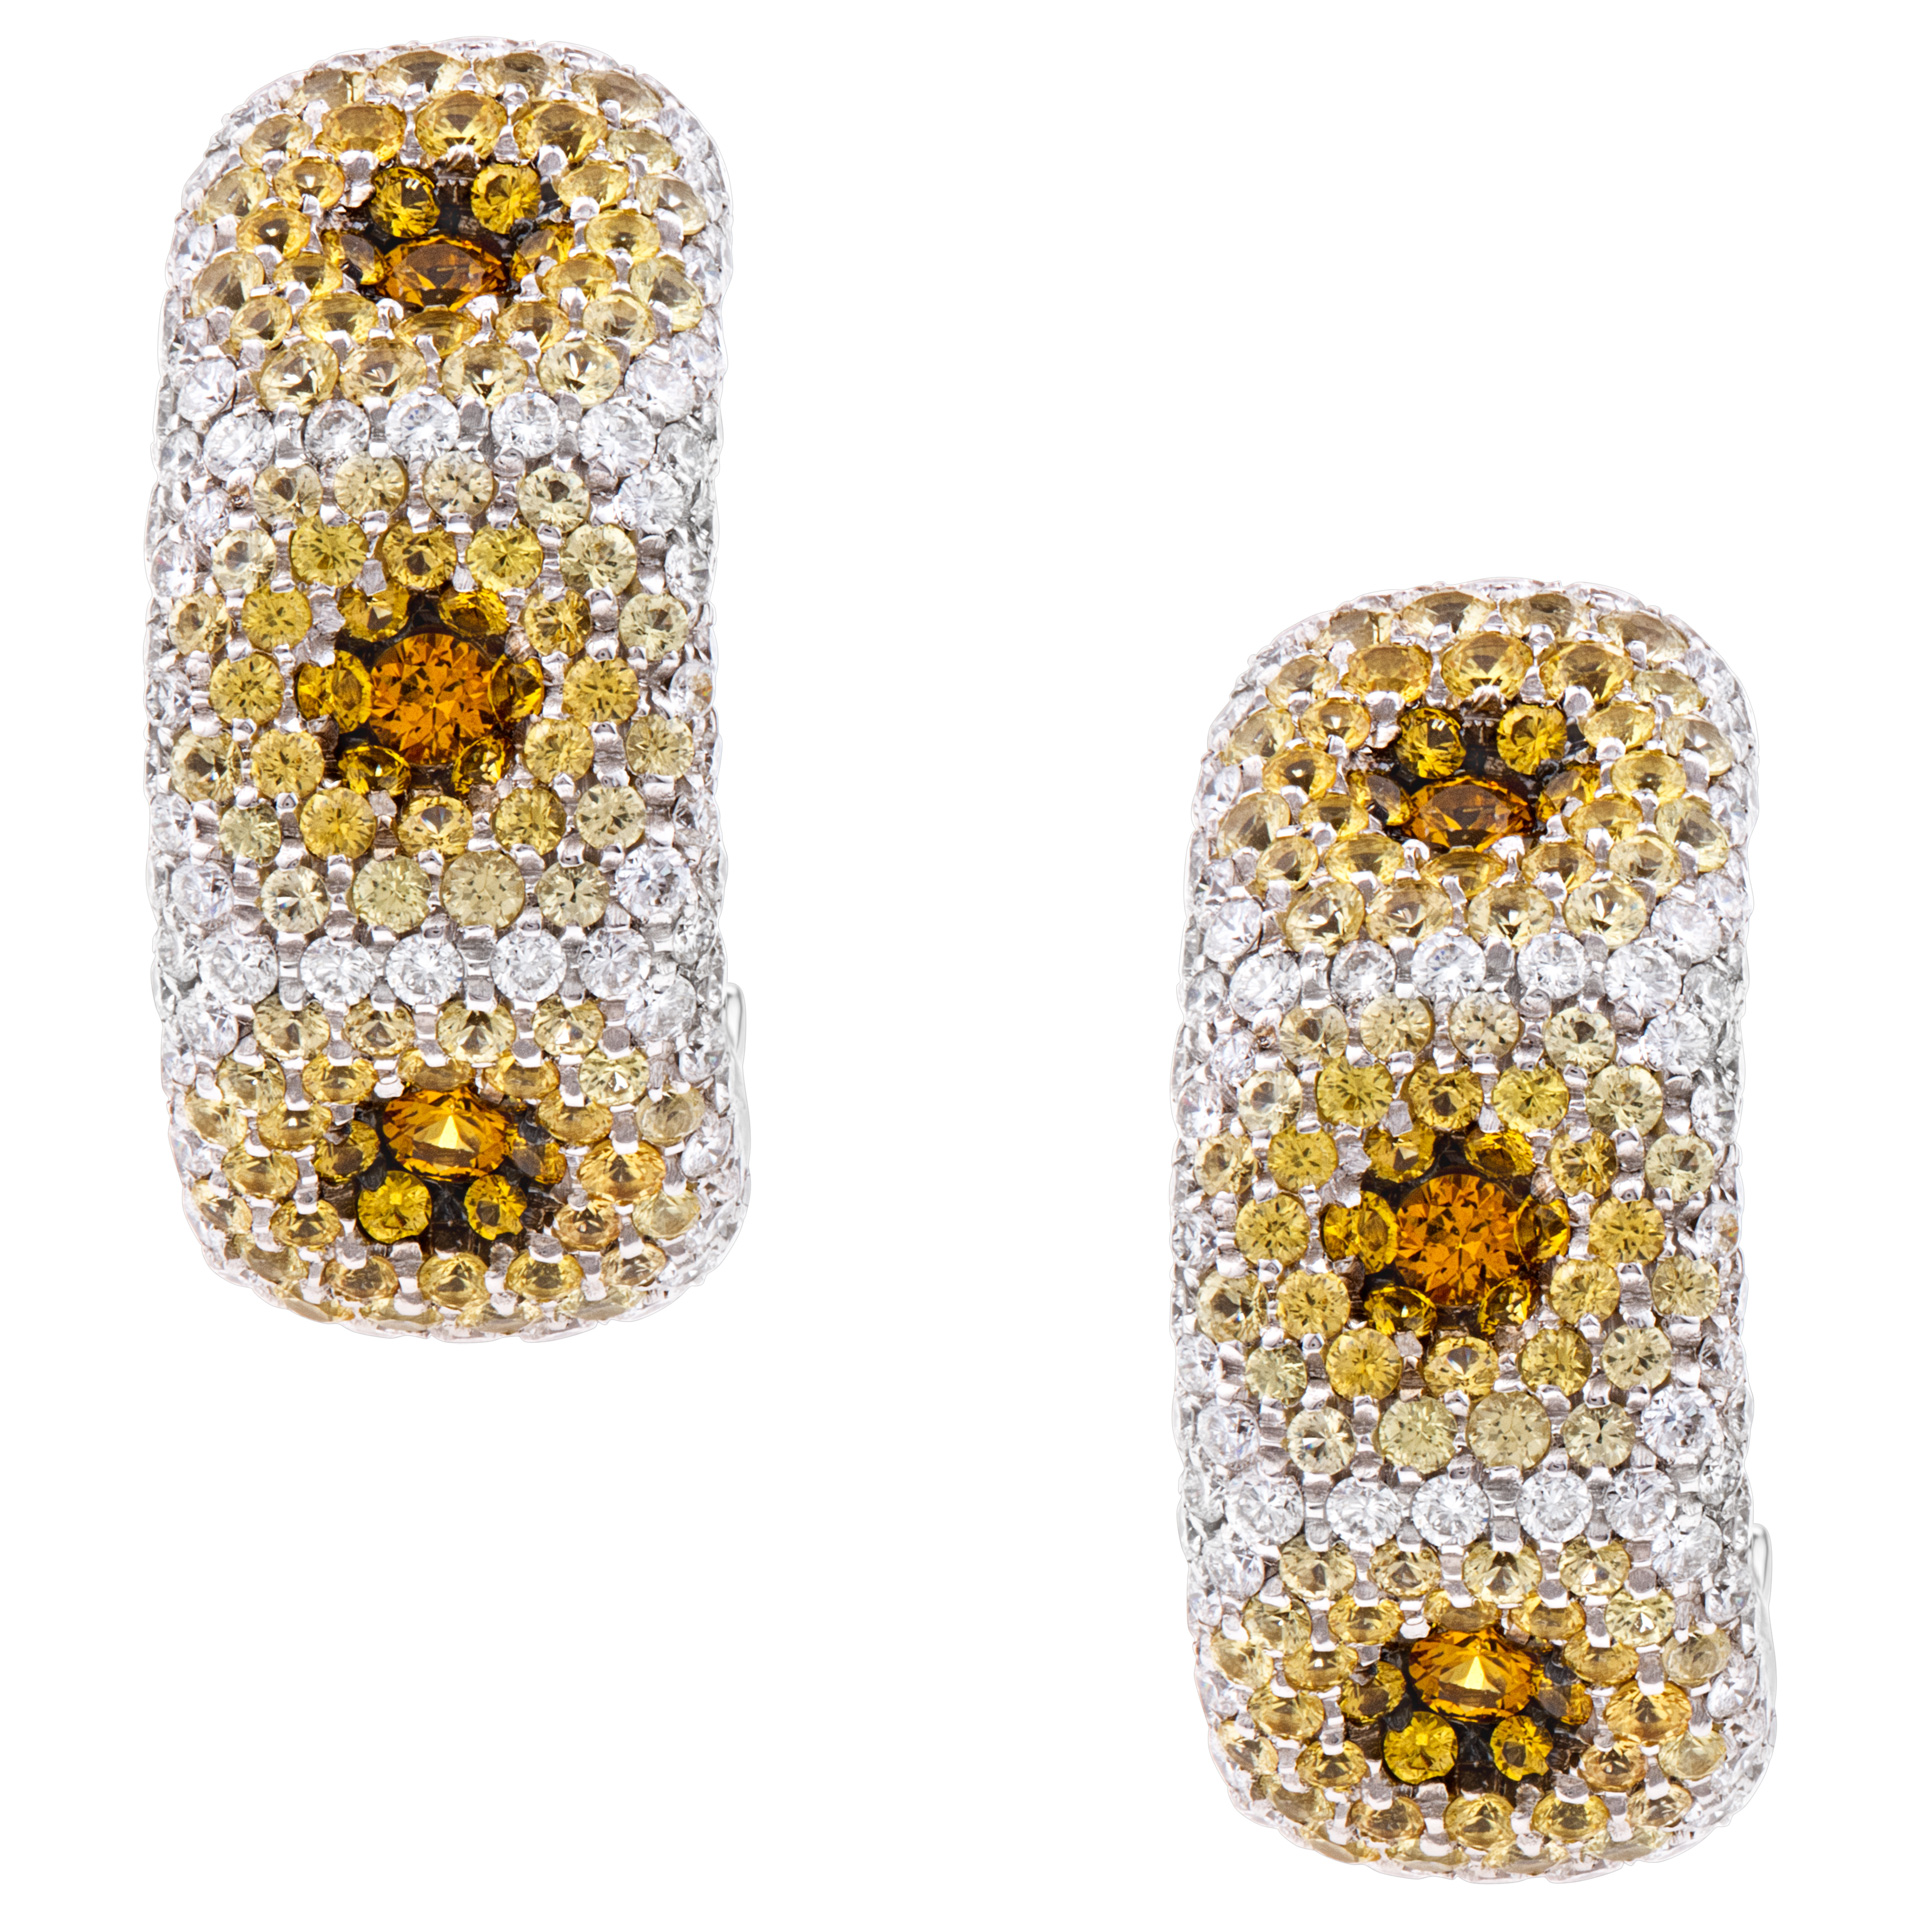 18k white gold pave diamond earrings with yellow sapphires